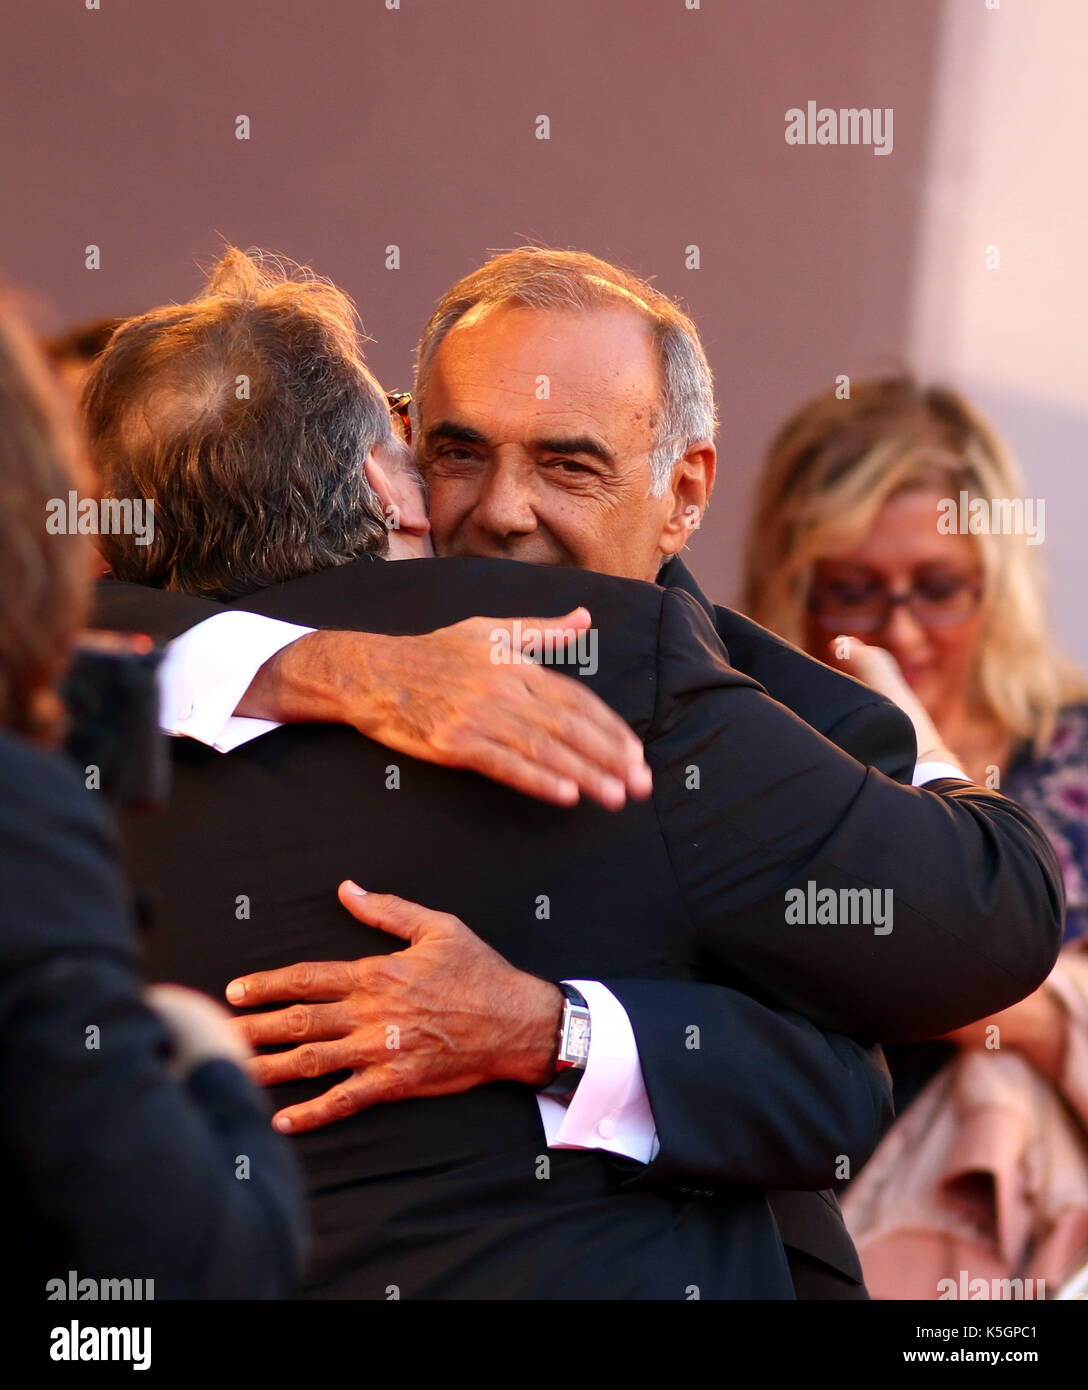 Venice, Italy. 9th September, 2017. Director of the Venice International Film Festival Alberto Barbera with Director Guillermo Del Toro attends at the Award Ceremony during the 74th Venice International Film Festival at Lido of Venice on 9th September, 2017. Credit: Andrea Spinelli/Alamy Live News Stock Photo